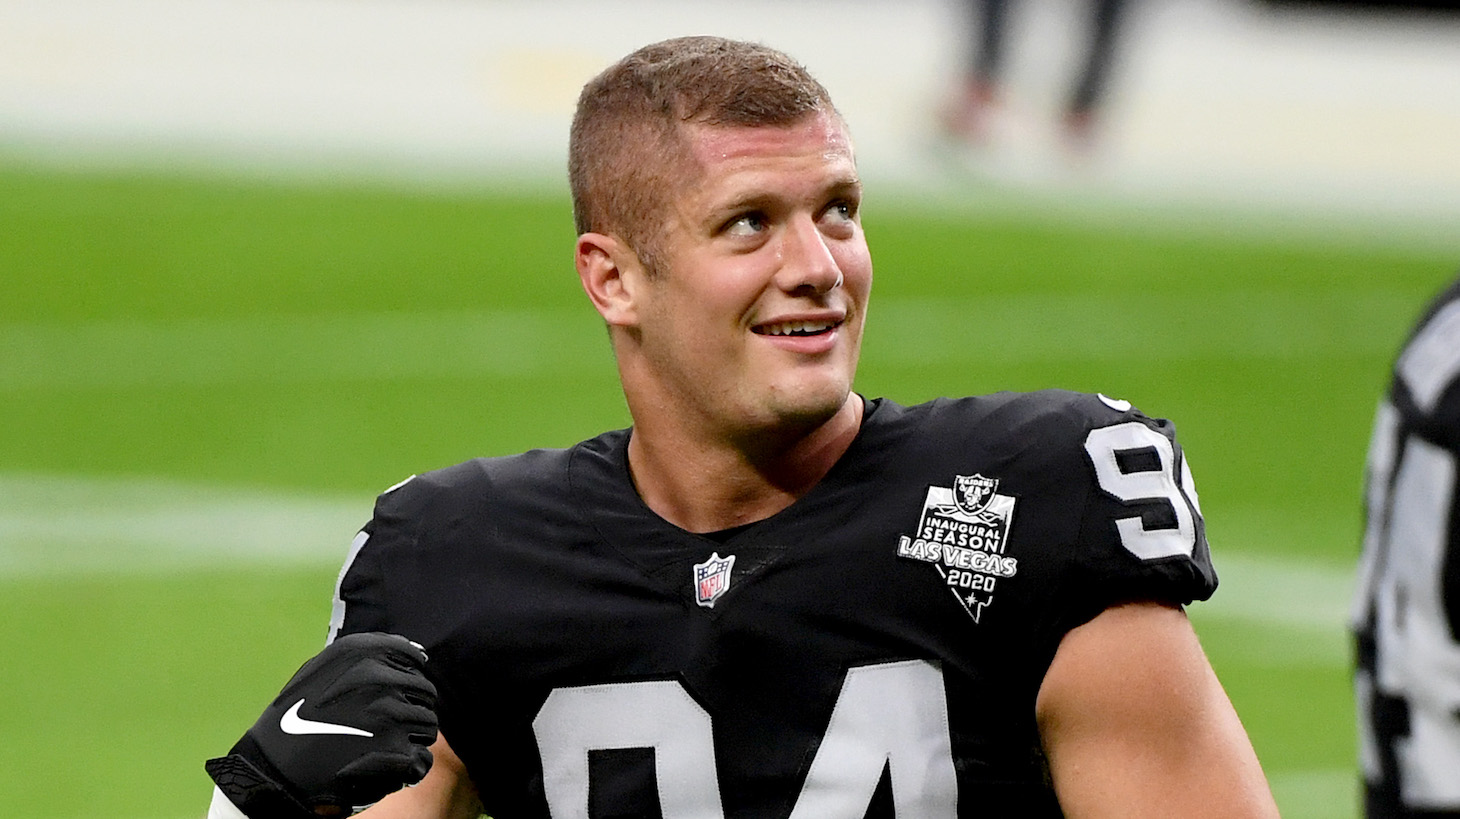 LAS VEGAS, NEVADA - NOVEMBER 15: Carl Nassib #94 of the Las Vegas Raiders flexes during warmups before a game against the Denver Broncos at Allegiant Stadium on November 15, 2020 in Las Vegas, Nevada. The Raiders defeated the Broncos 37-12. (Photo by Ethan Miller/Getty Images)